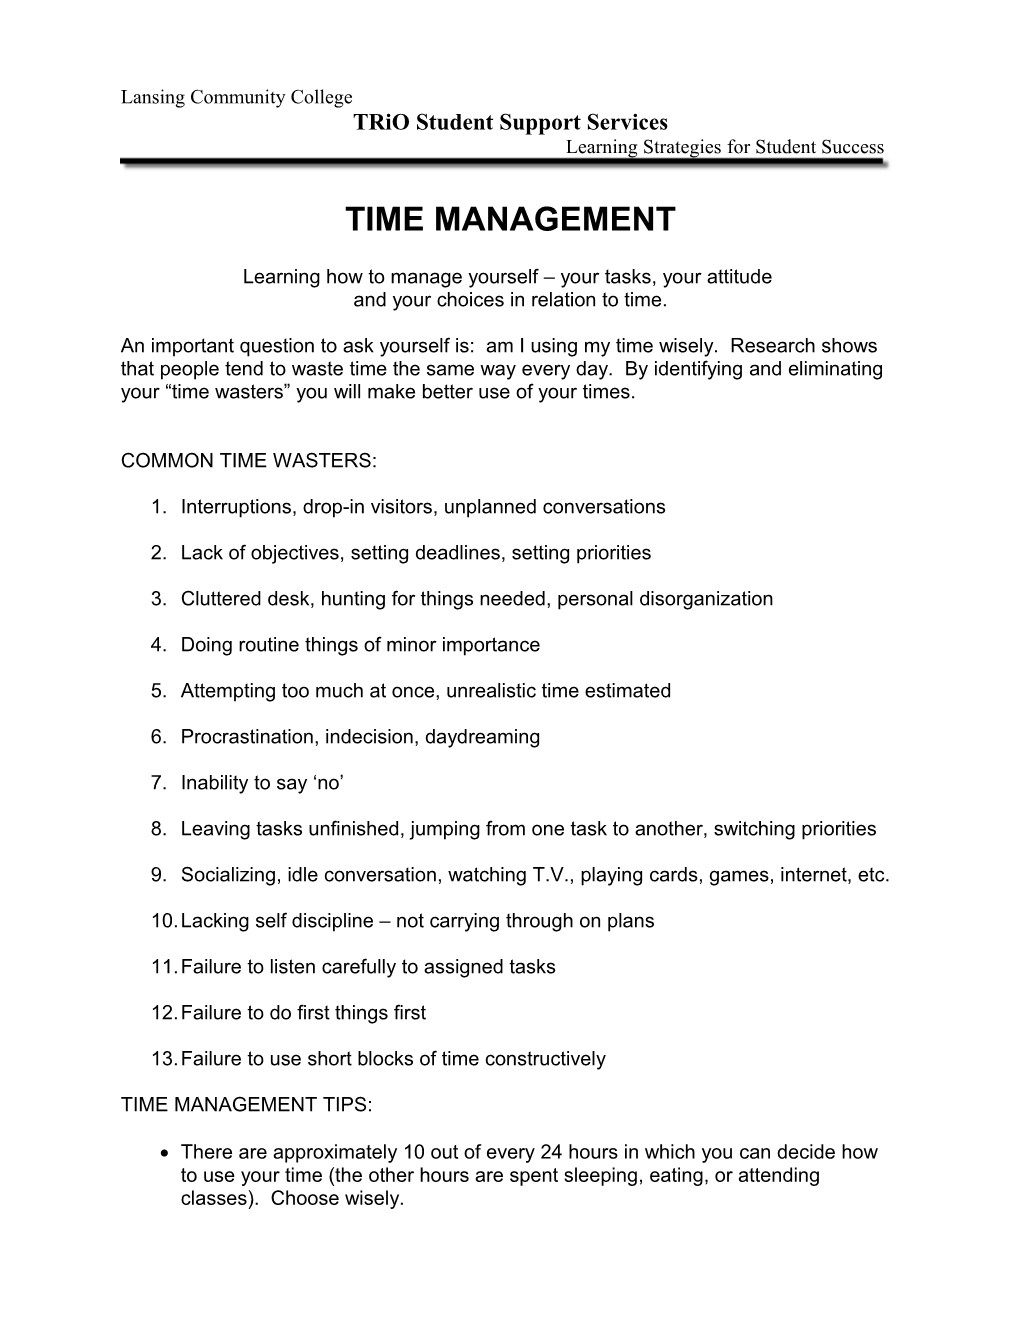 Study Skills - Time Management - Trio Student Support Services